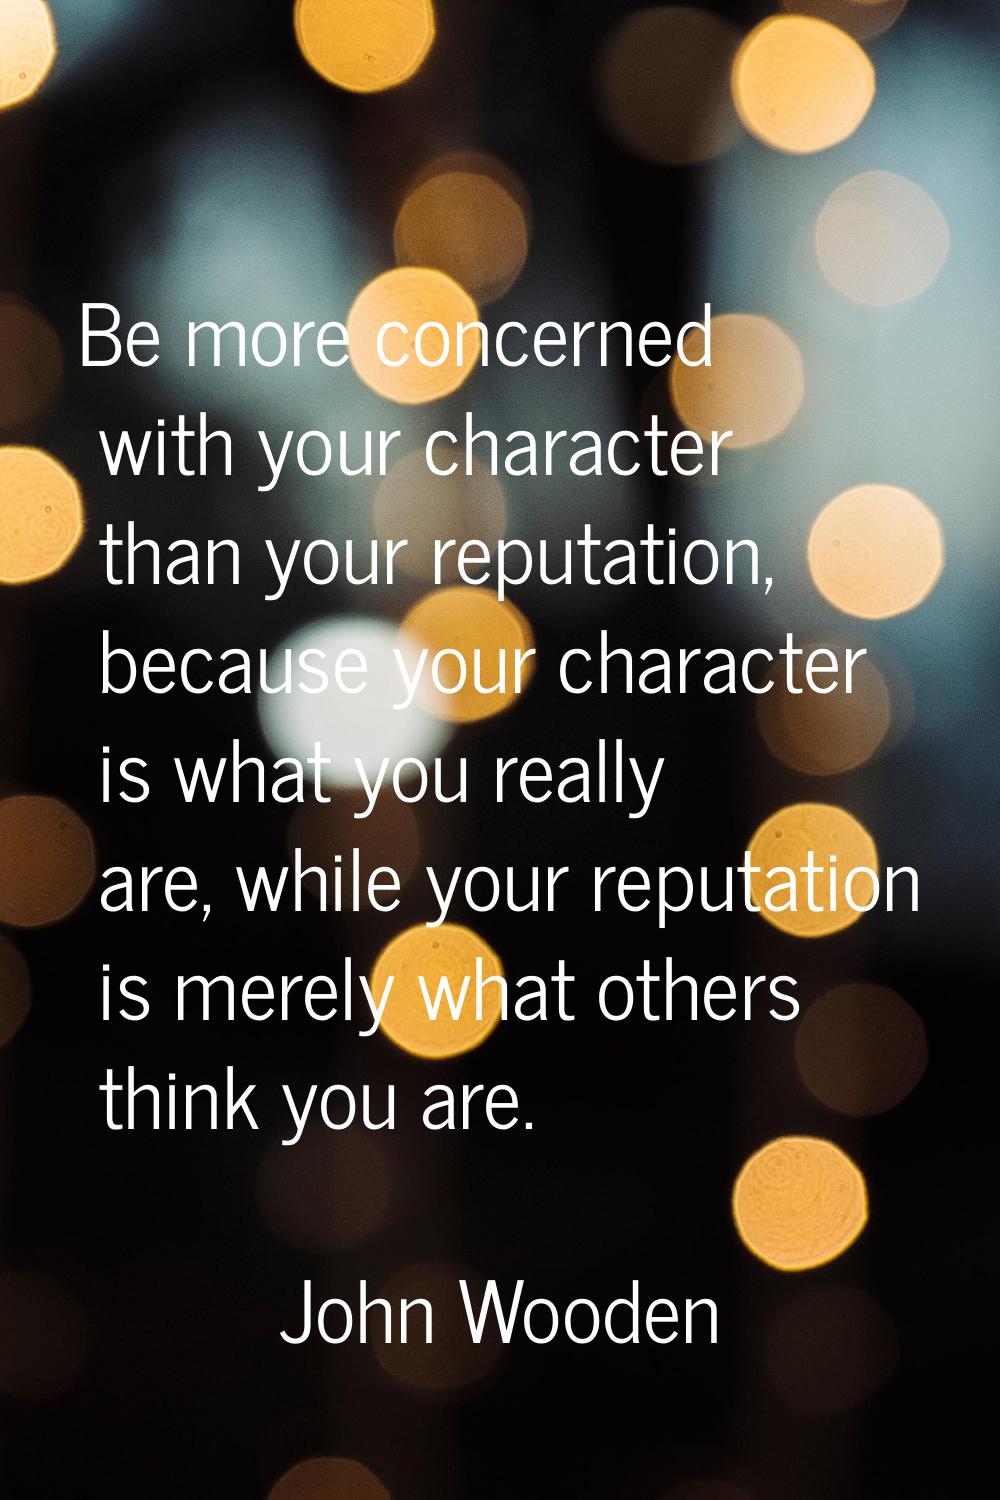 Be more concerned with your character than your reputation, because your character is what you real